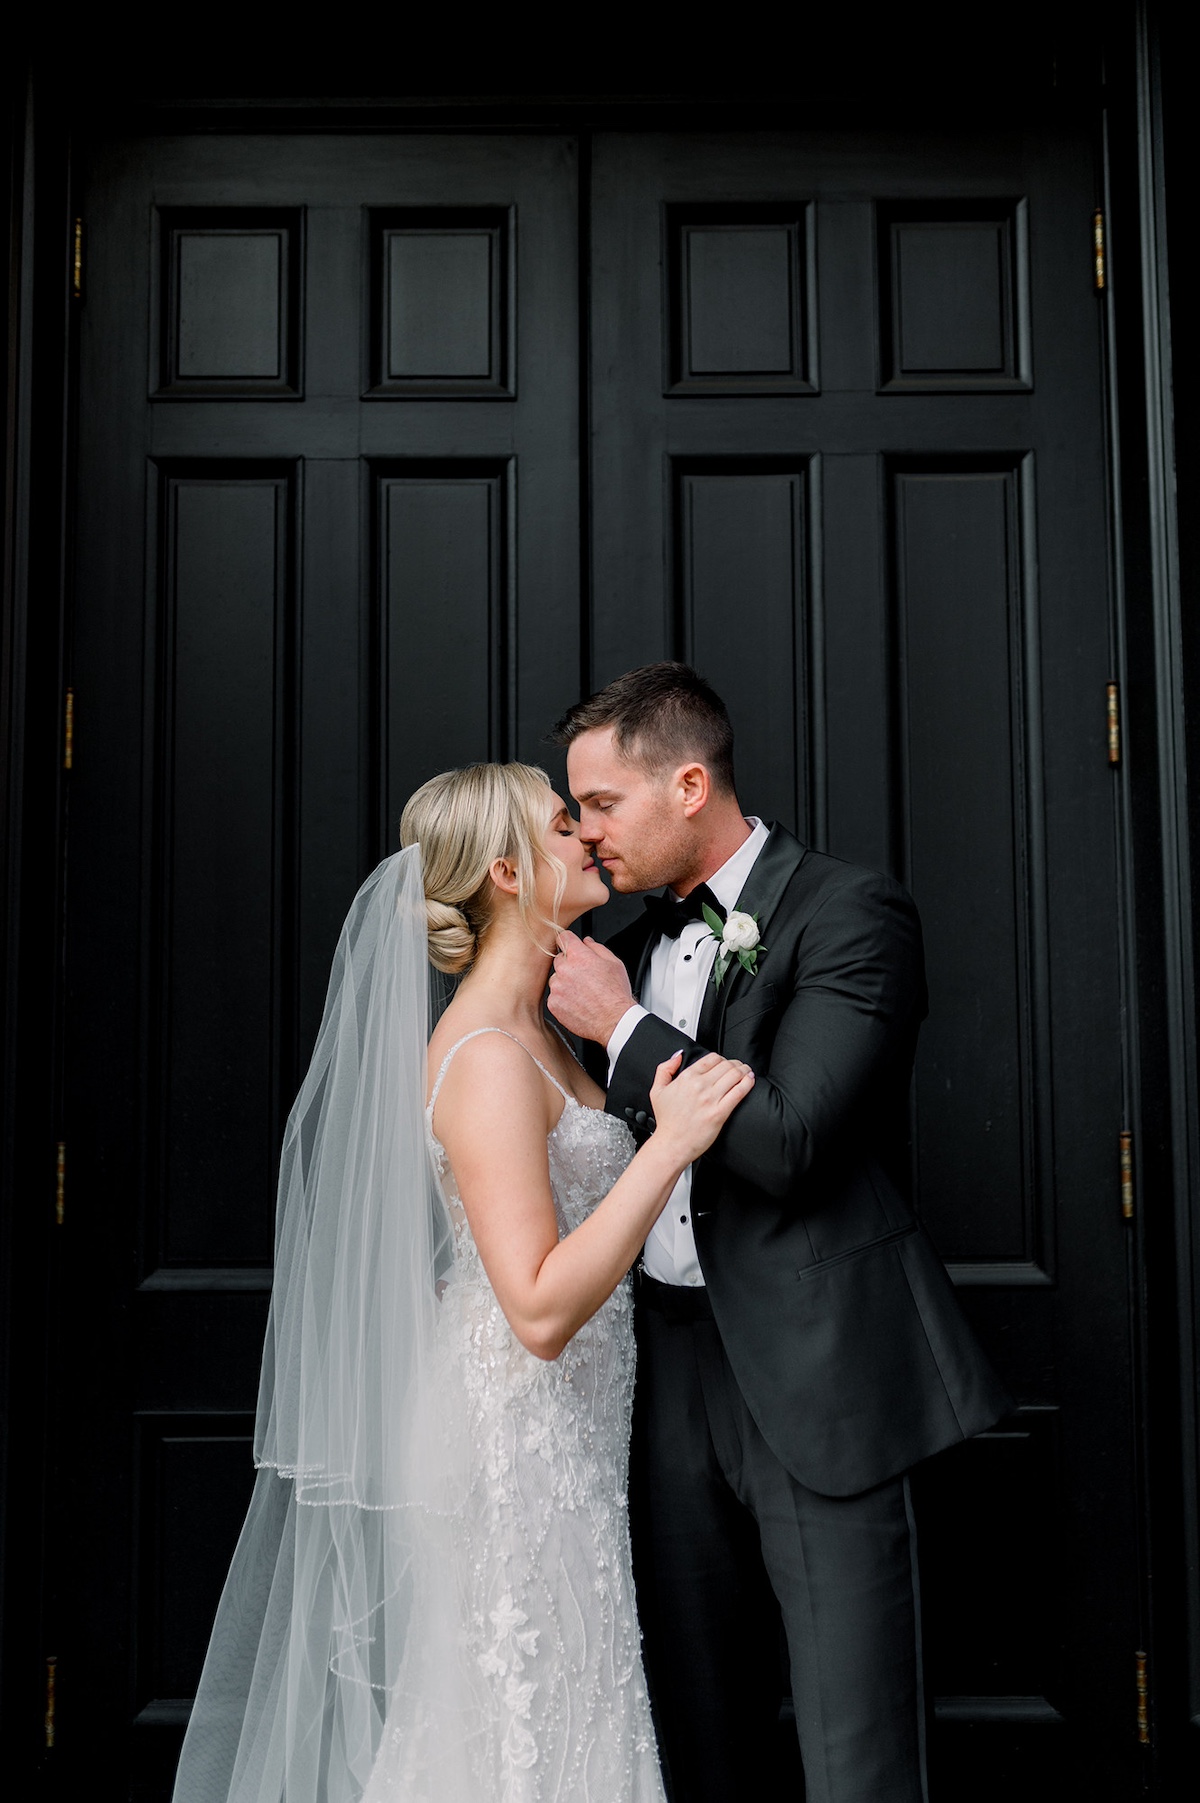 Romance in the heart of Lancaster City, the bride and groom's portrait against the cityscape exudes sophistication and high-end style.